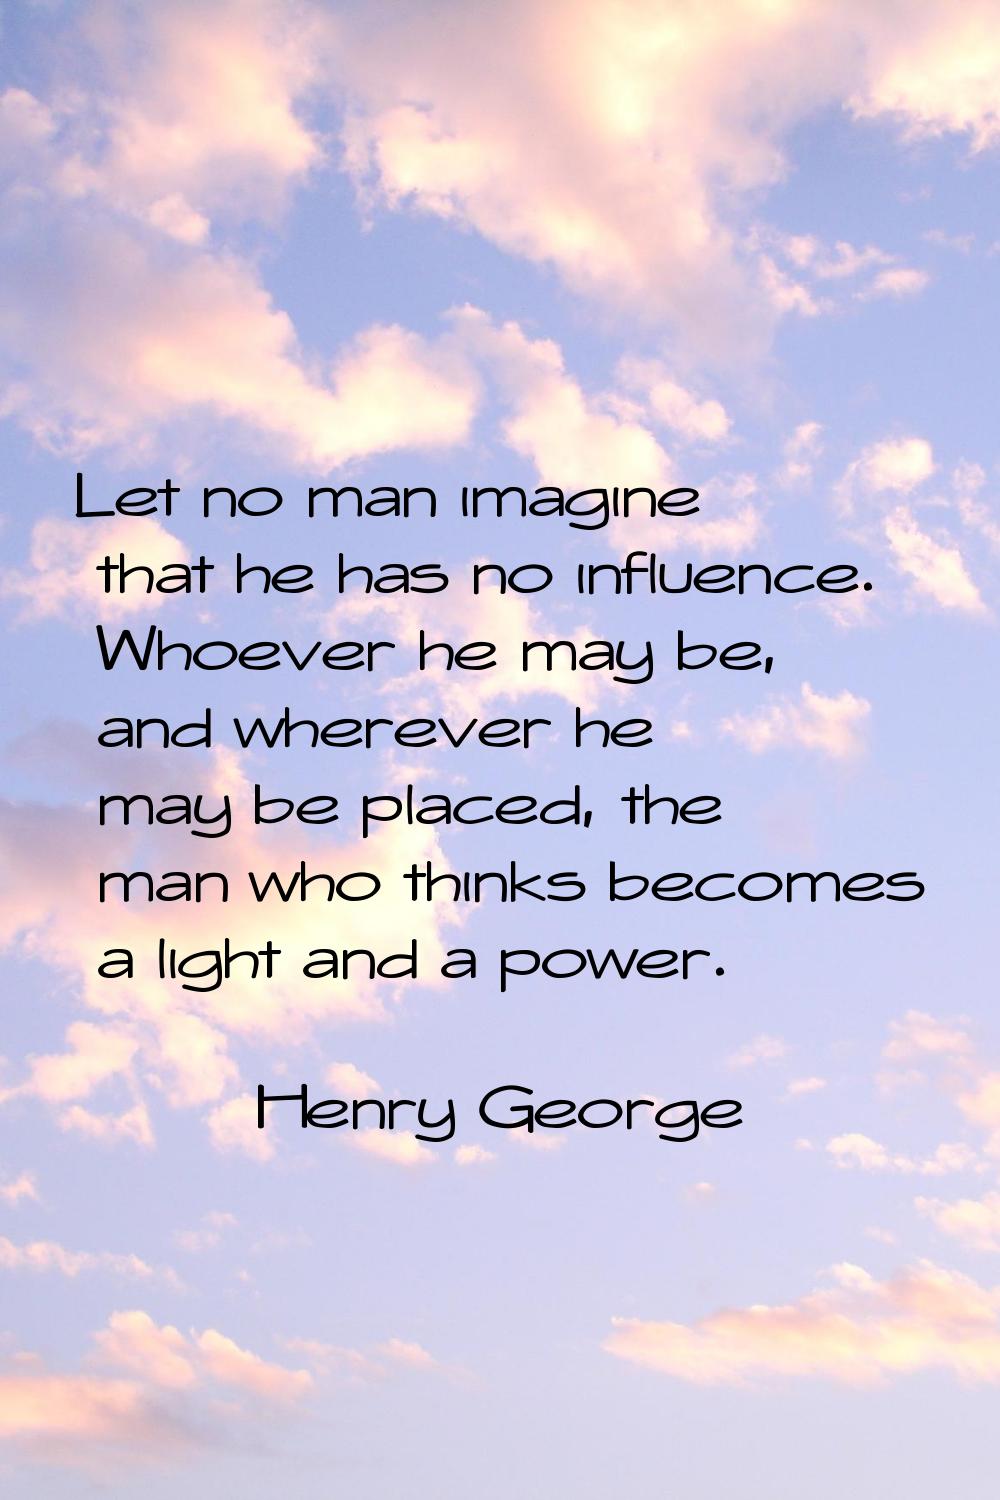 Let no man imagine that he has no influence. Whoever he may be, and wherever he may be placed, the 